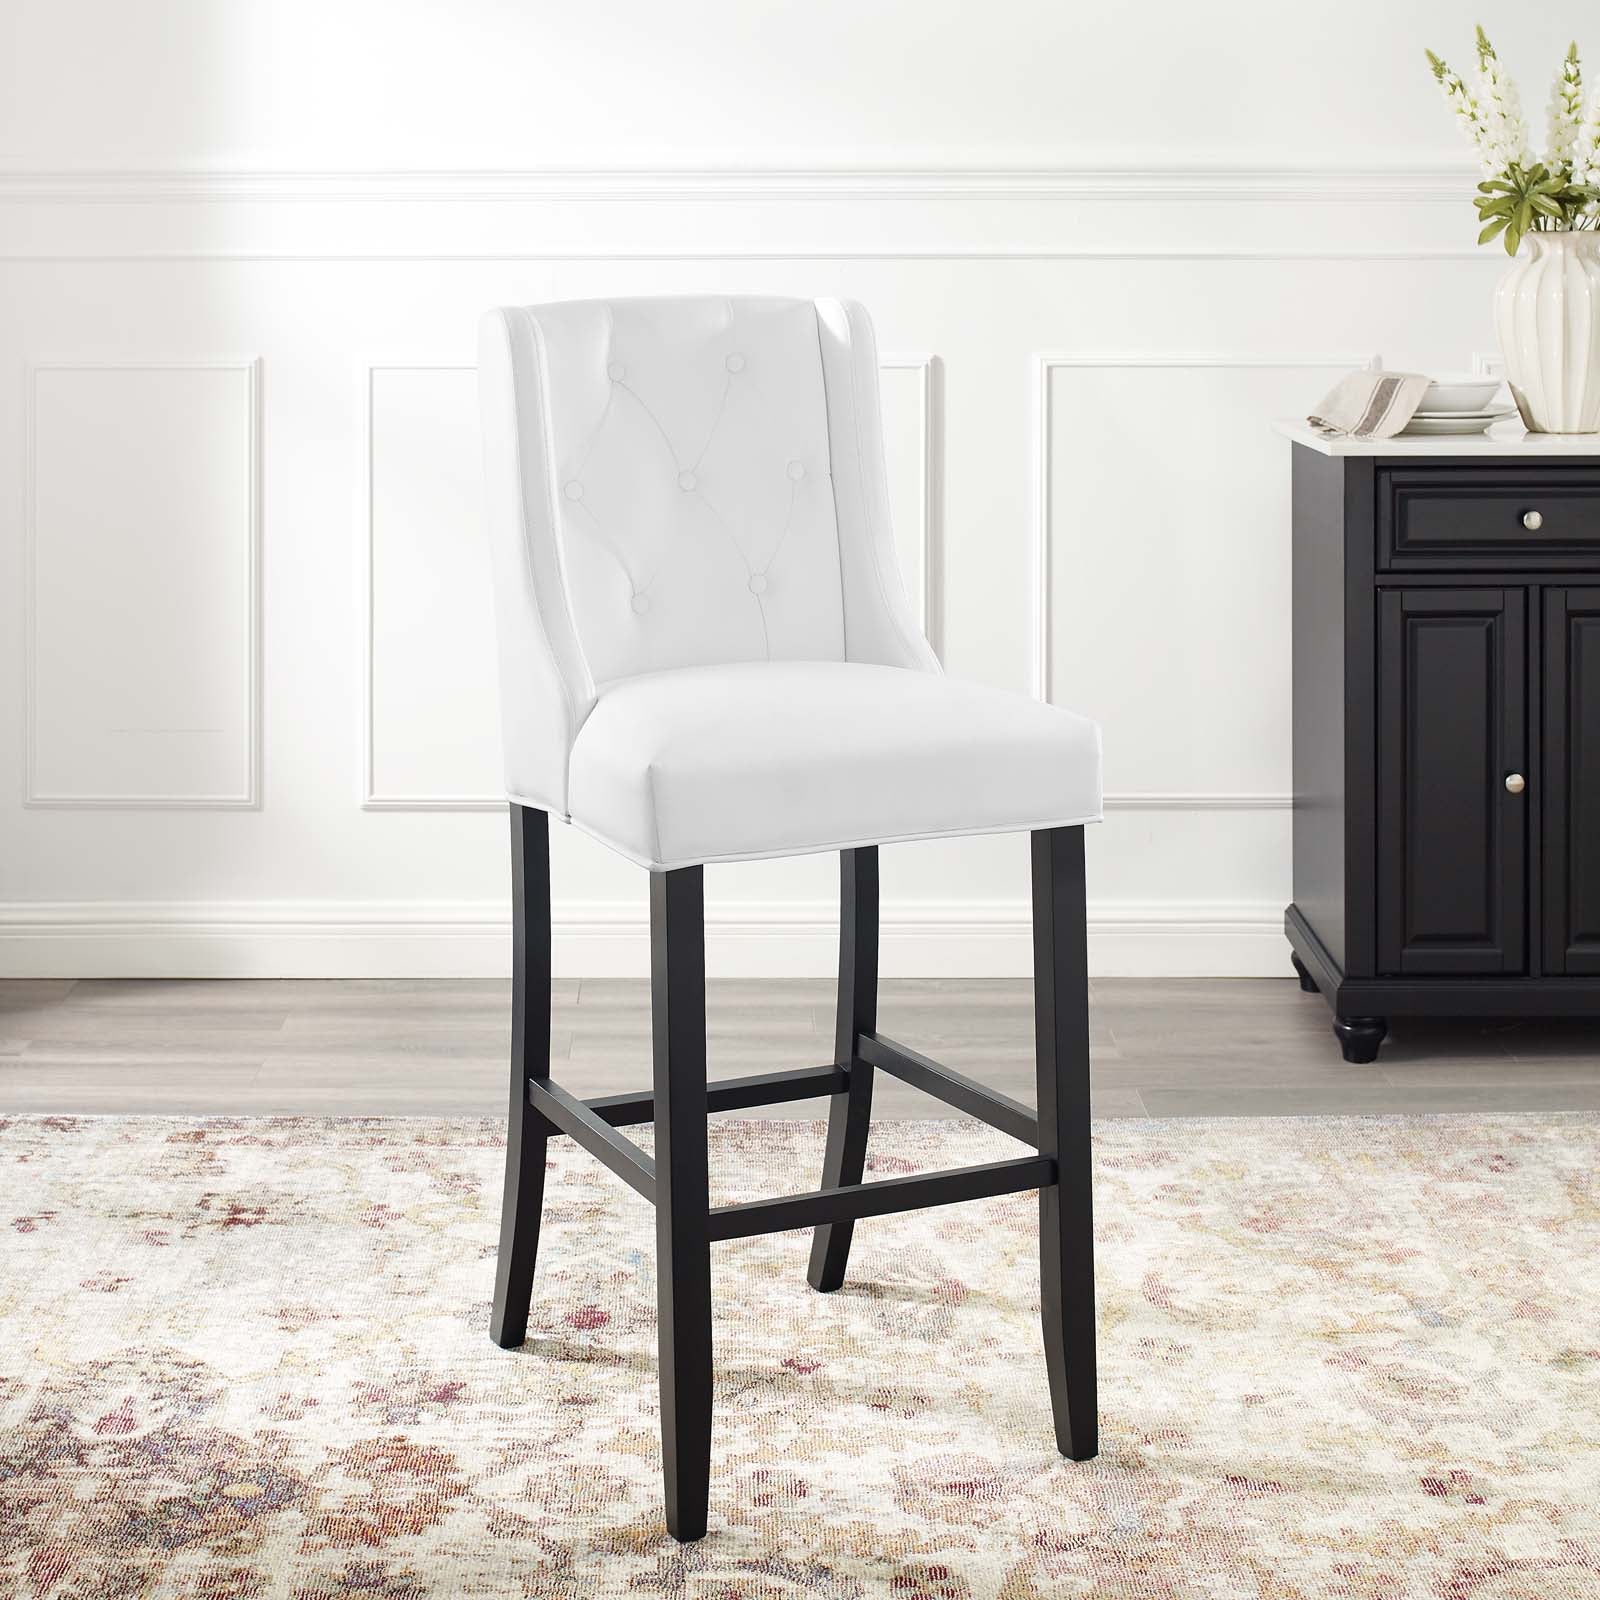 Baronet Tufted Button Faux Leather Bar Stool - East Shore Modern Home Furnishings